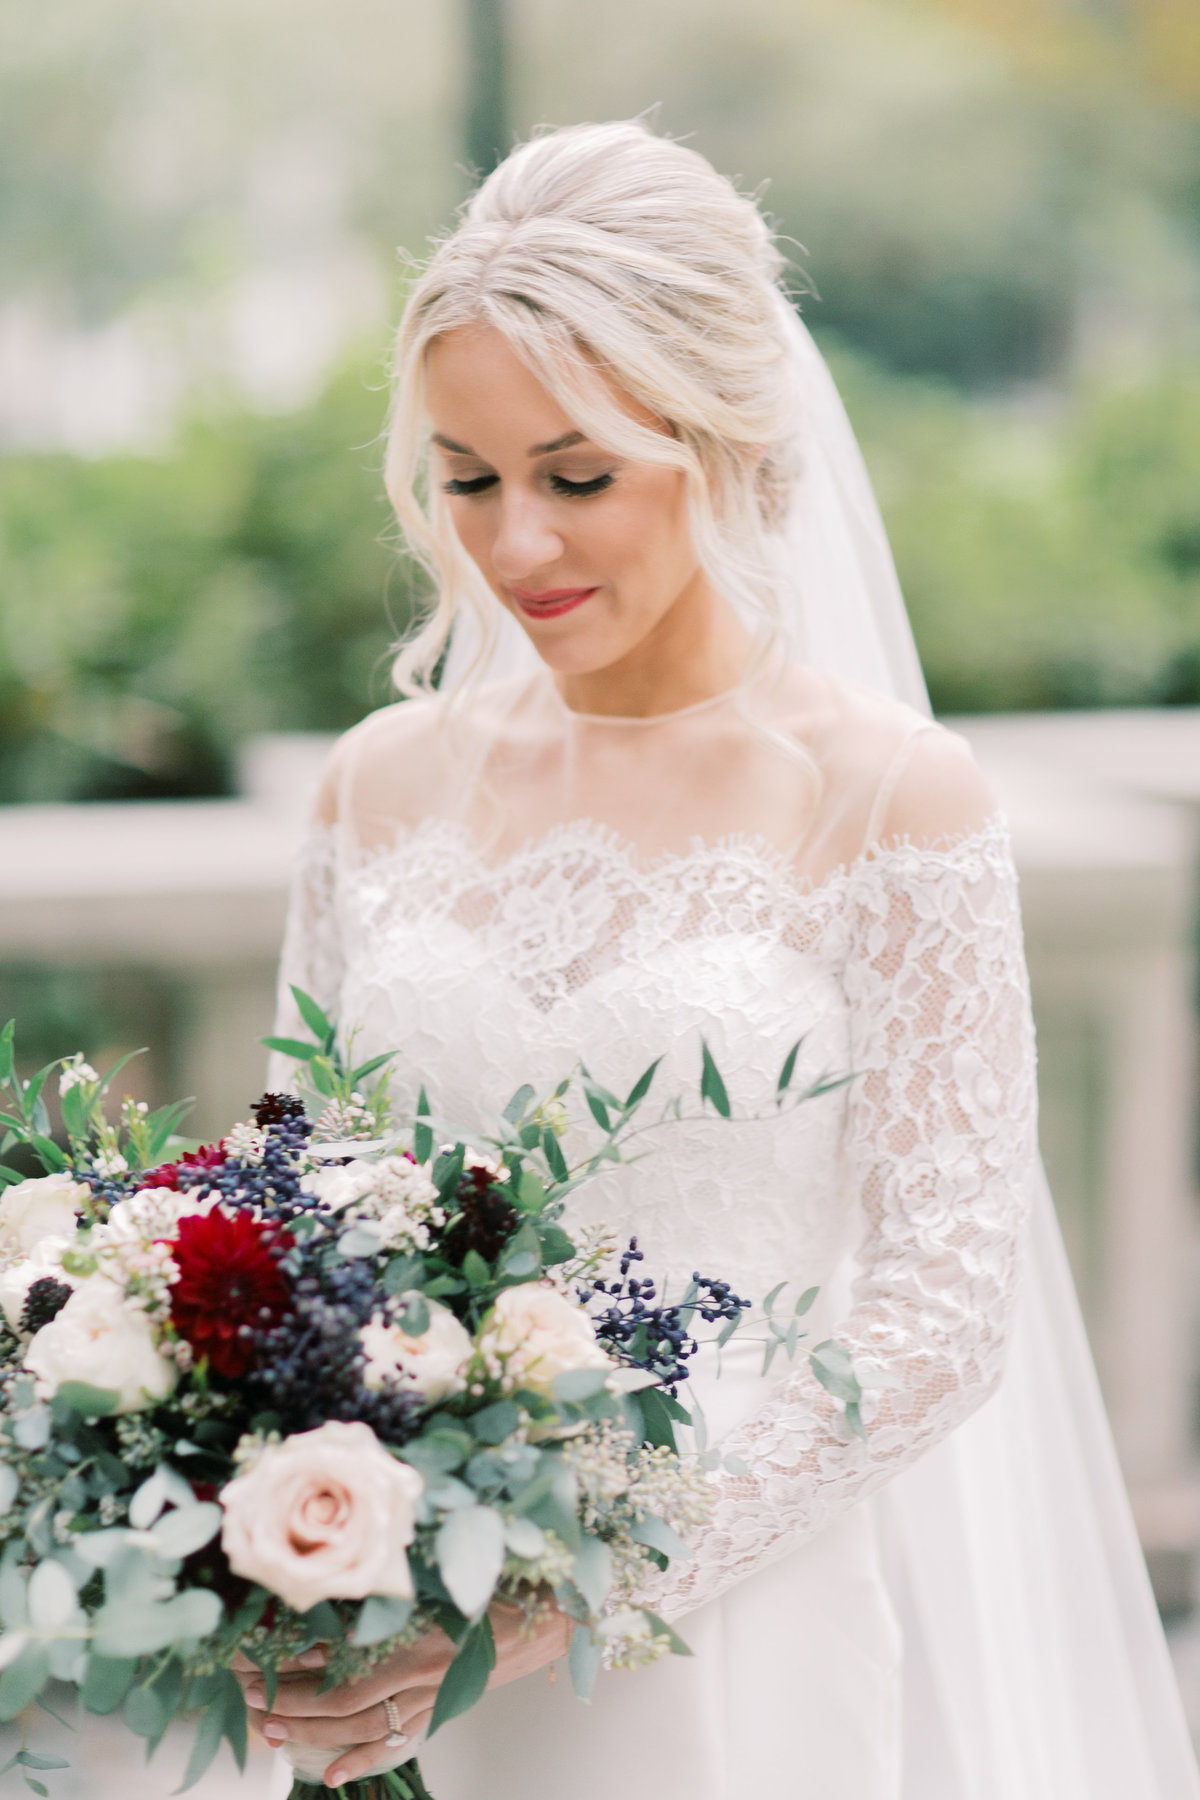 bride looking down at bridal bouquet wearing long lace veil